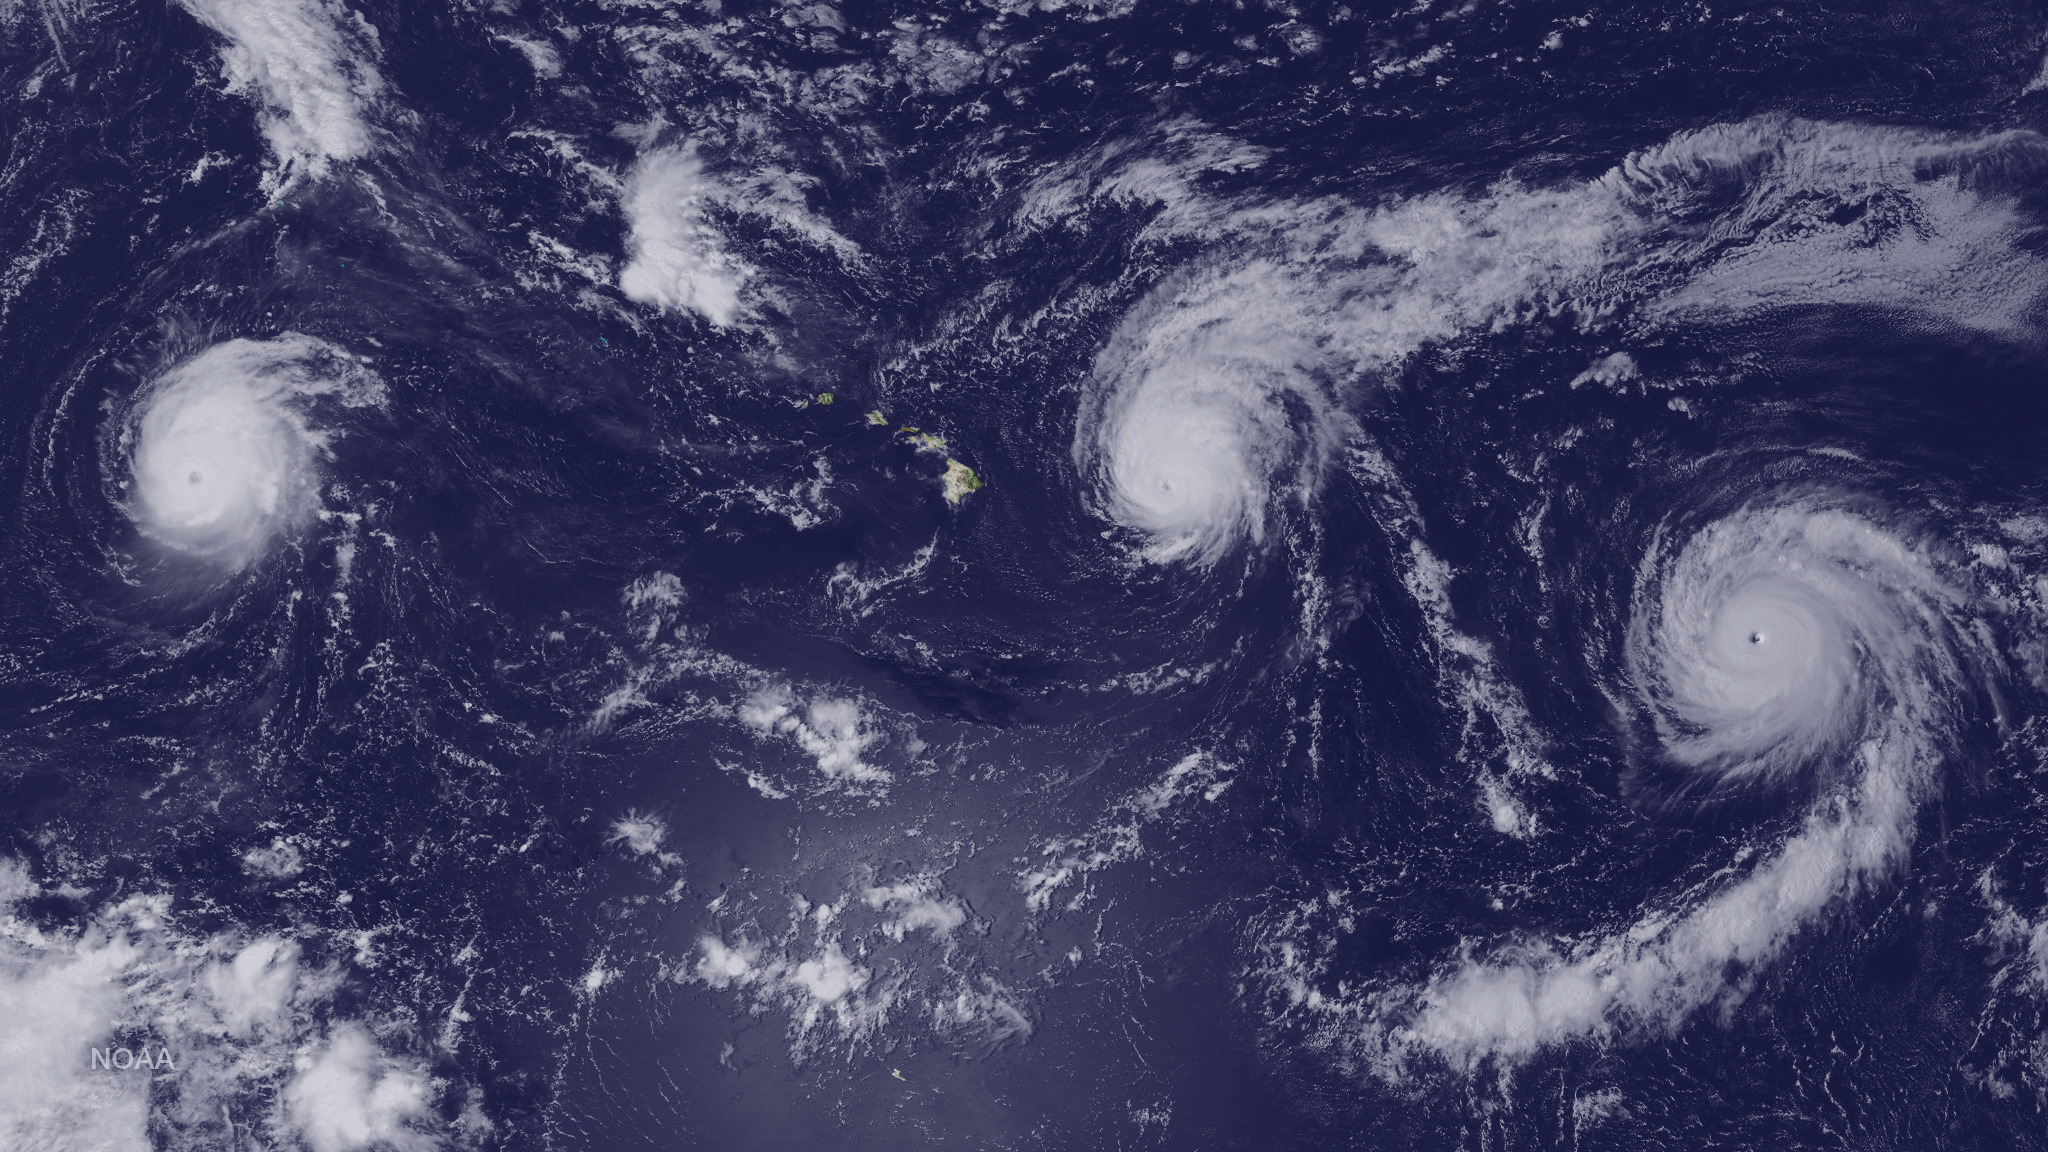 Kilo (right), Ignacio (center), and Jimena (left) simultaneously spin over the Eastern North Pacific Basin. Image from GOES West, August 31, 2015. Image by NOAA EVL.